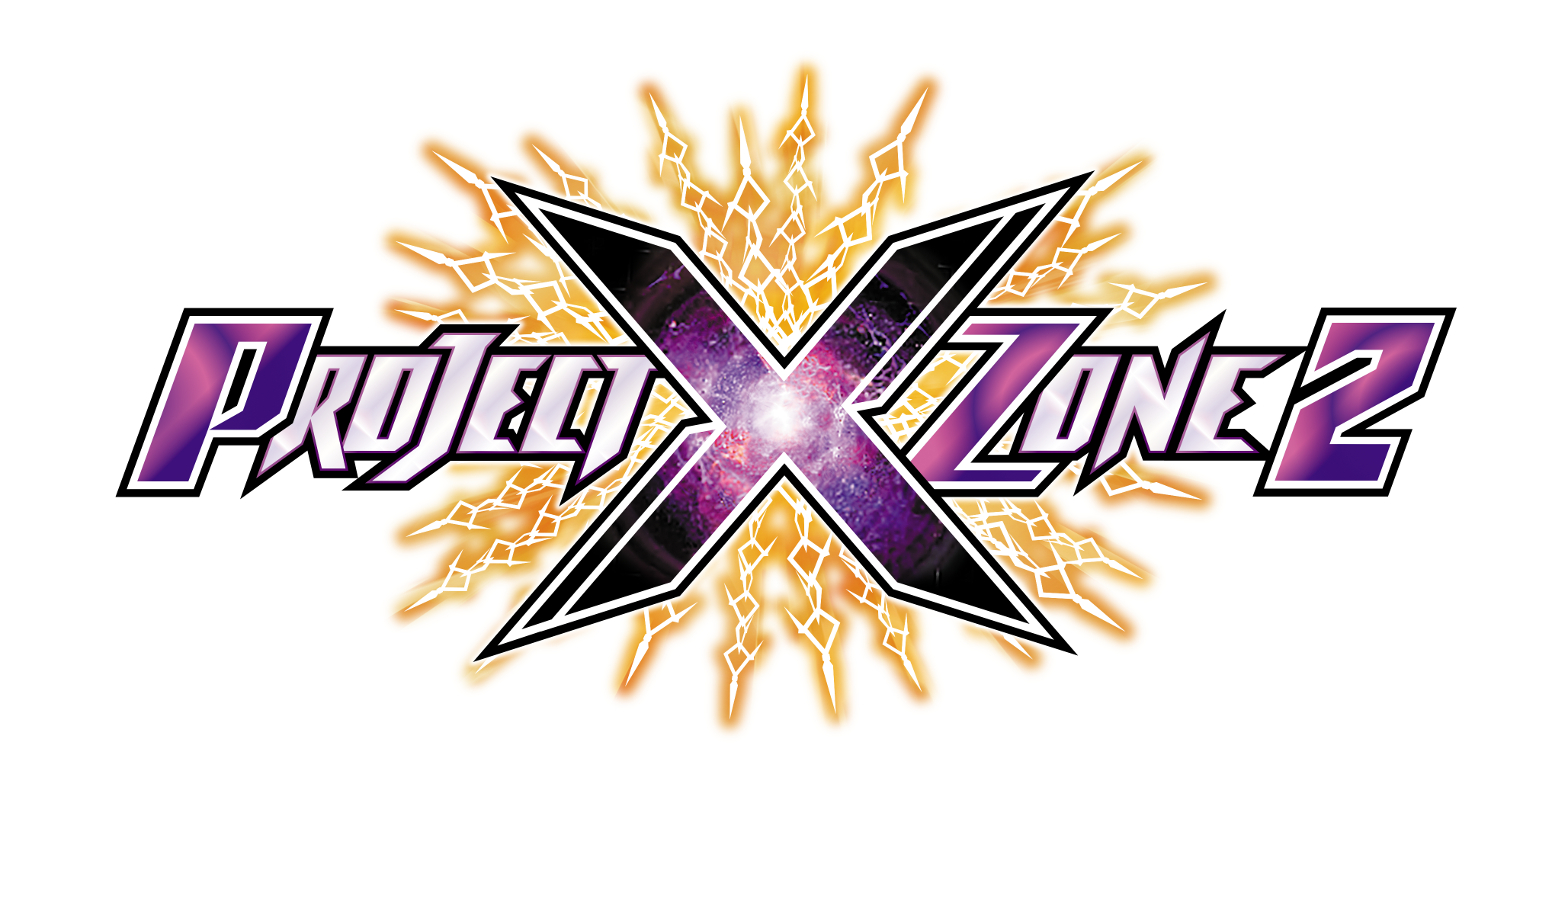 project x zone 3 download free